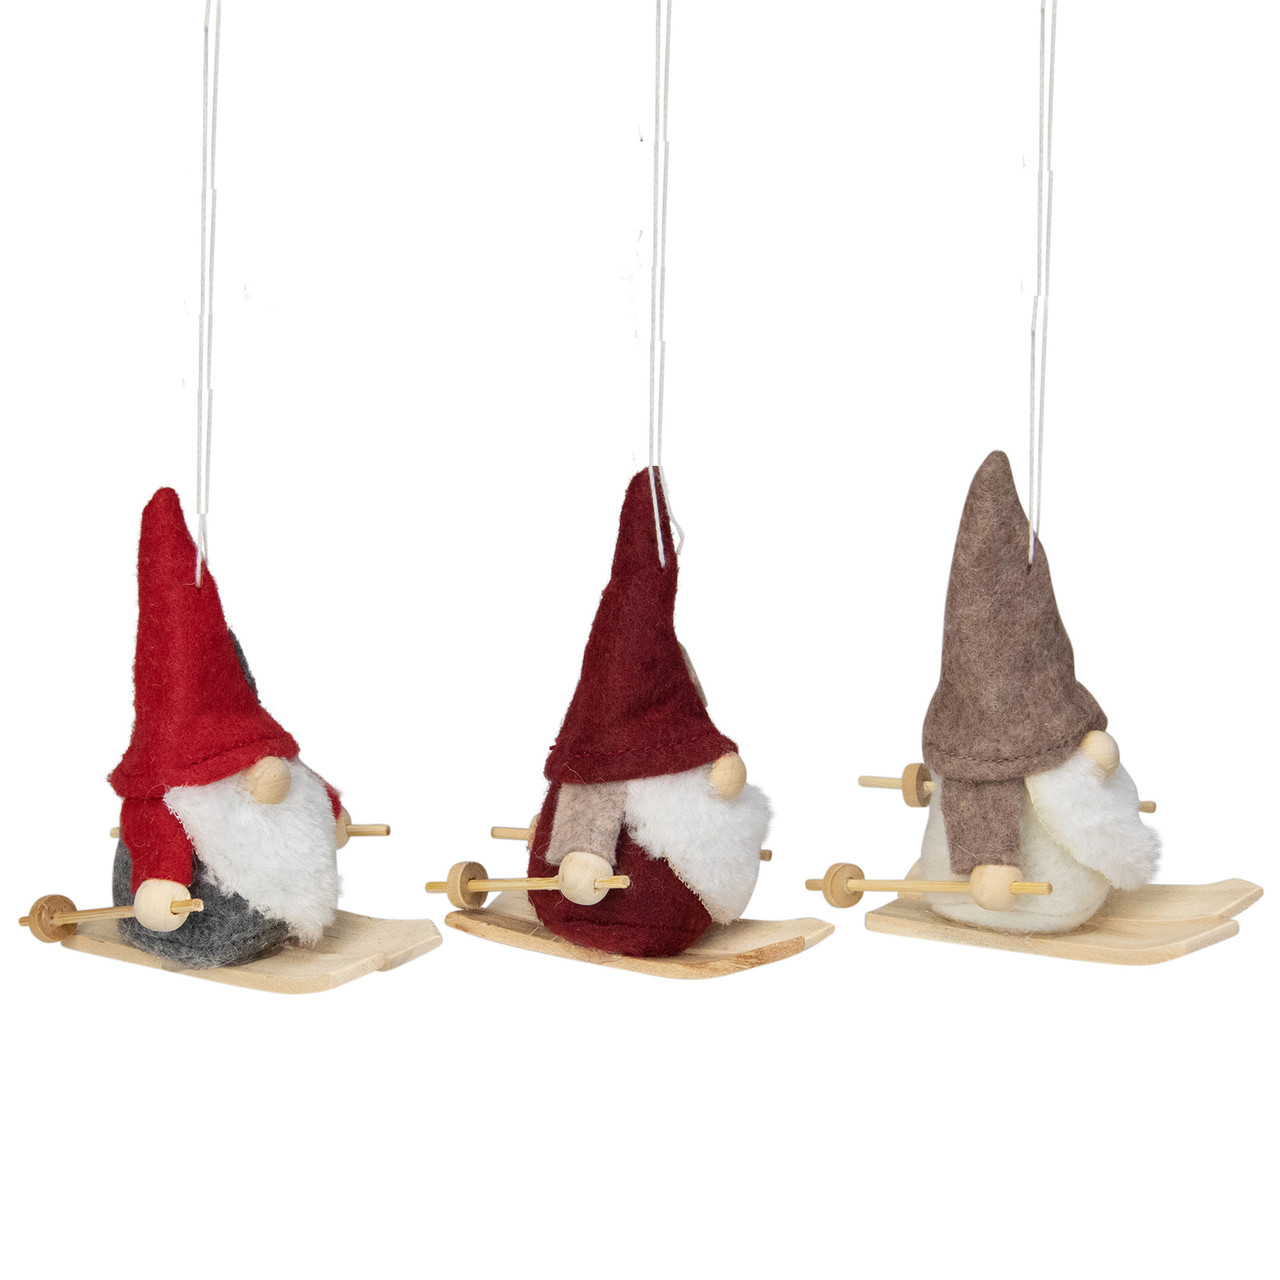 Northlight Set of 3 Decorative Red White and Gray Santa Gnome Hanging Christmas Ornaments 4.75